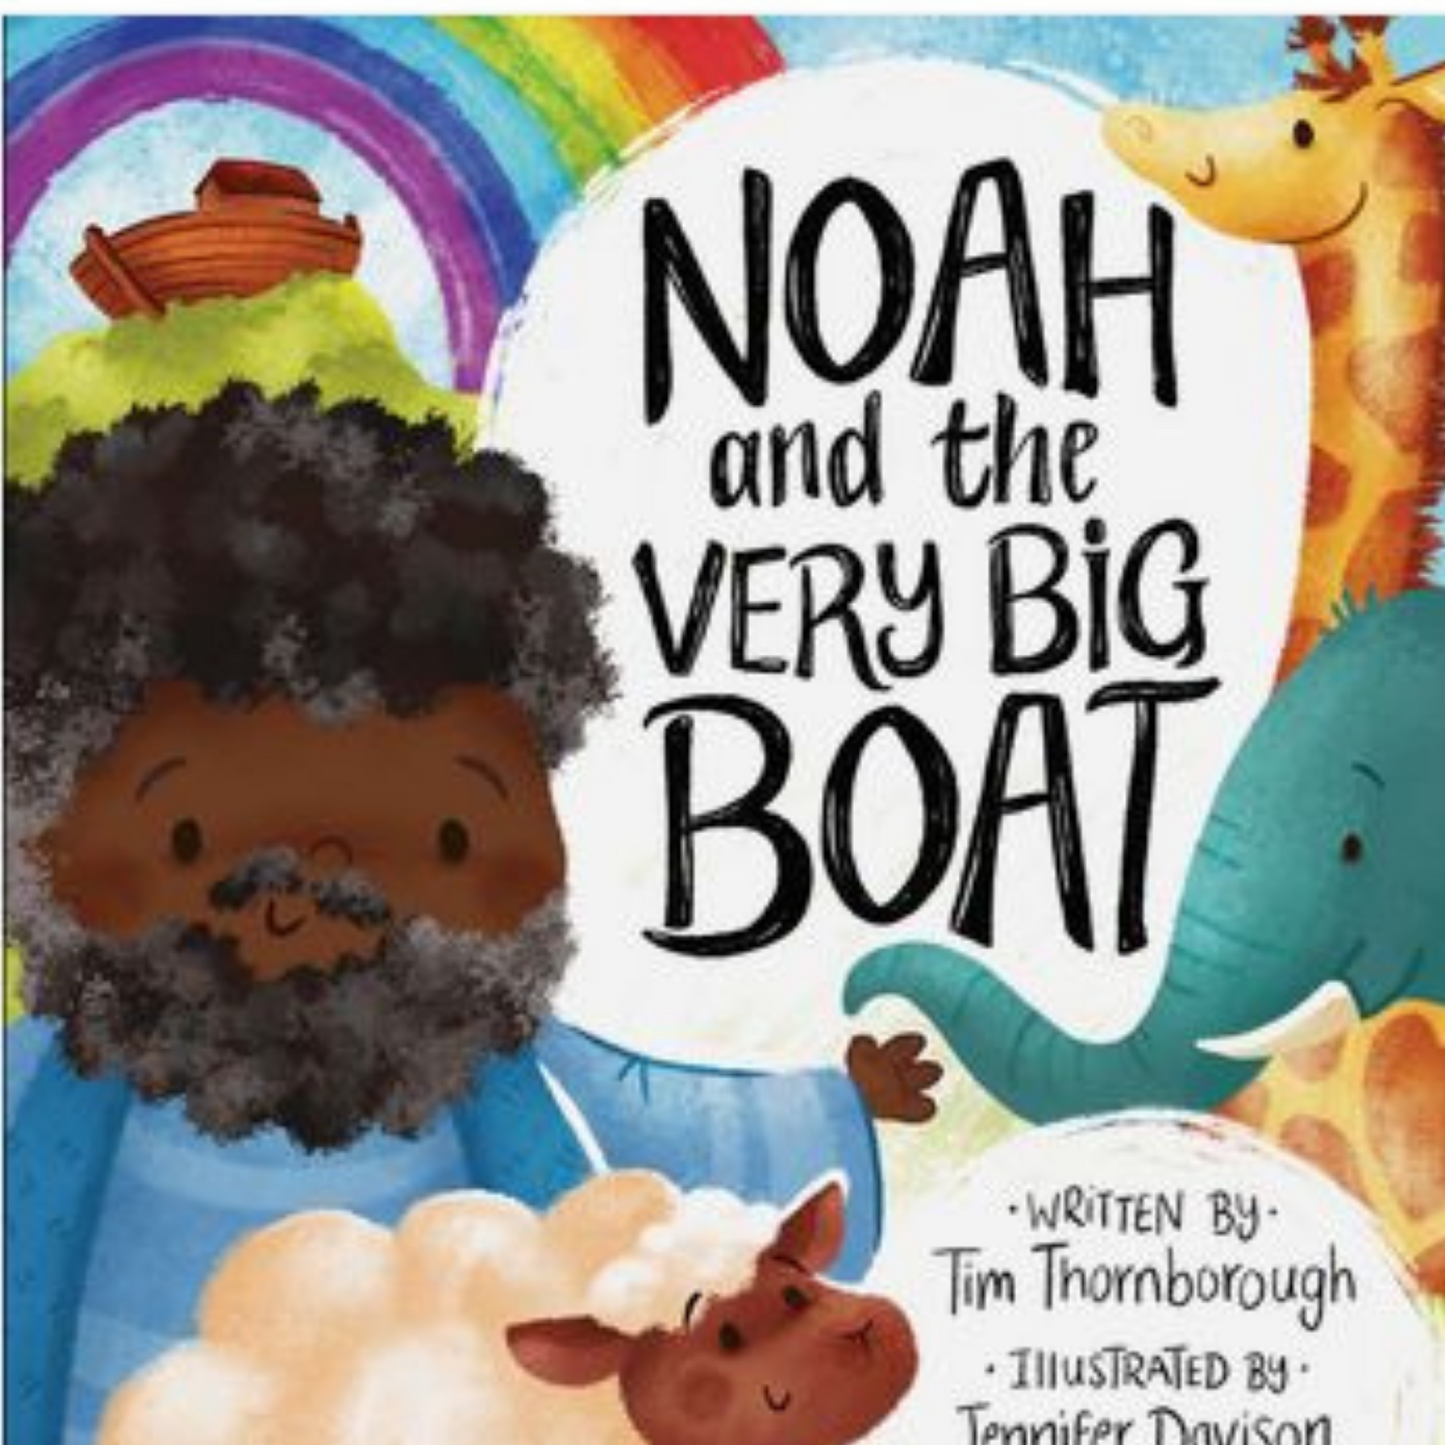 Noah and the very big boat